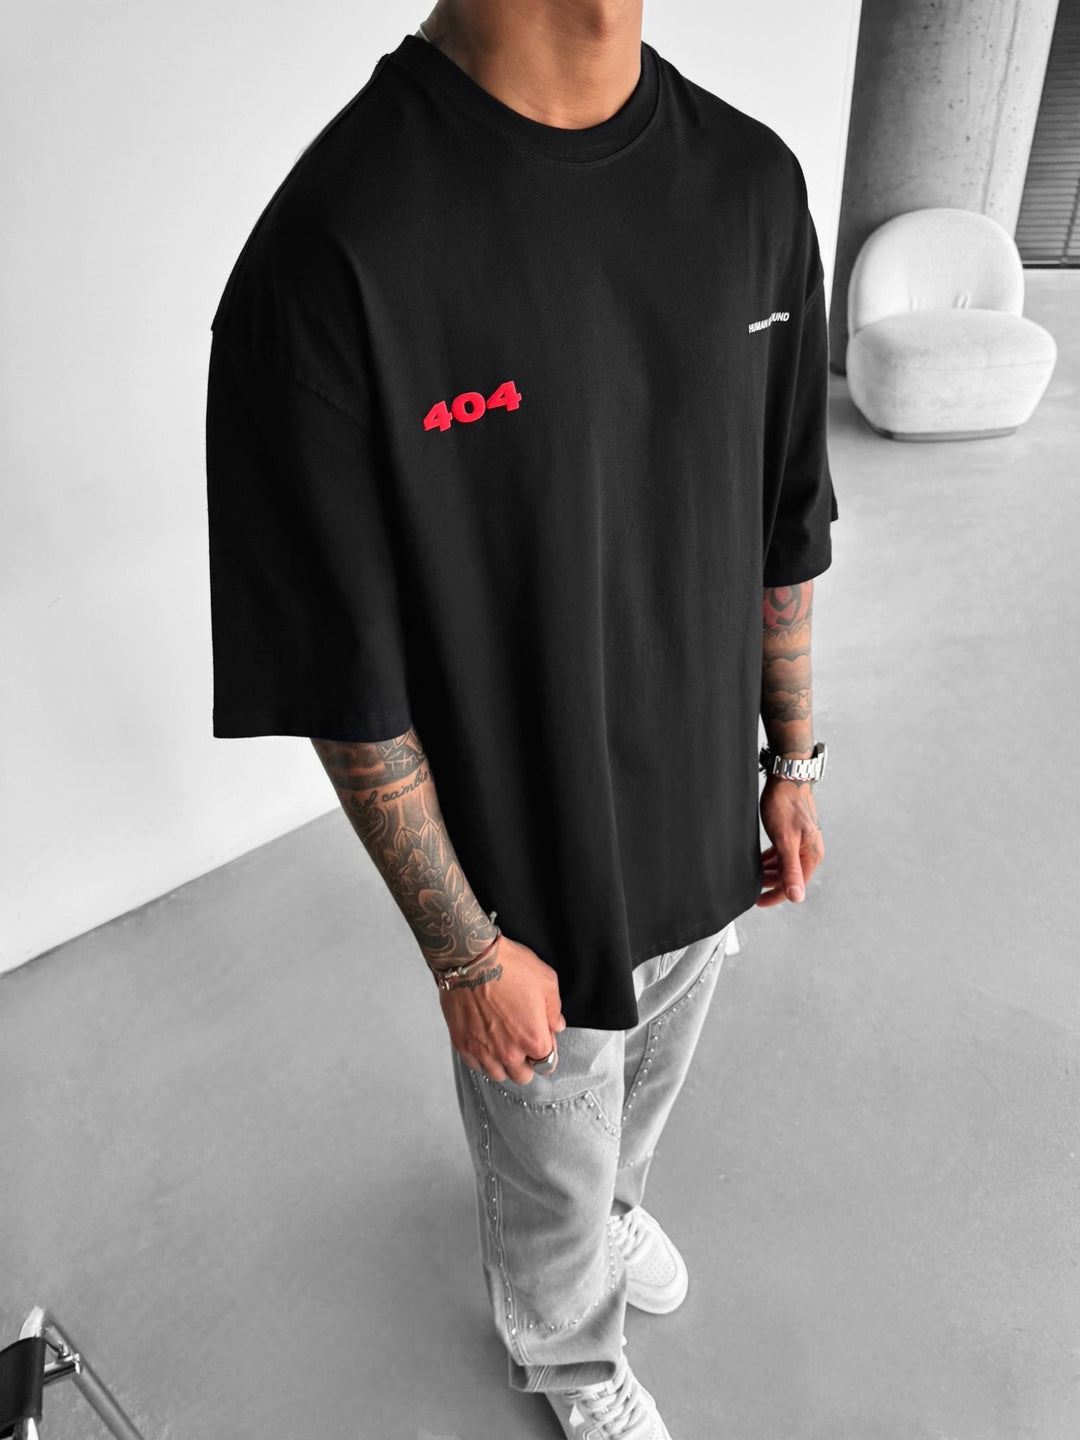 Oversize 404 T-shirt - Black and Red